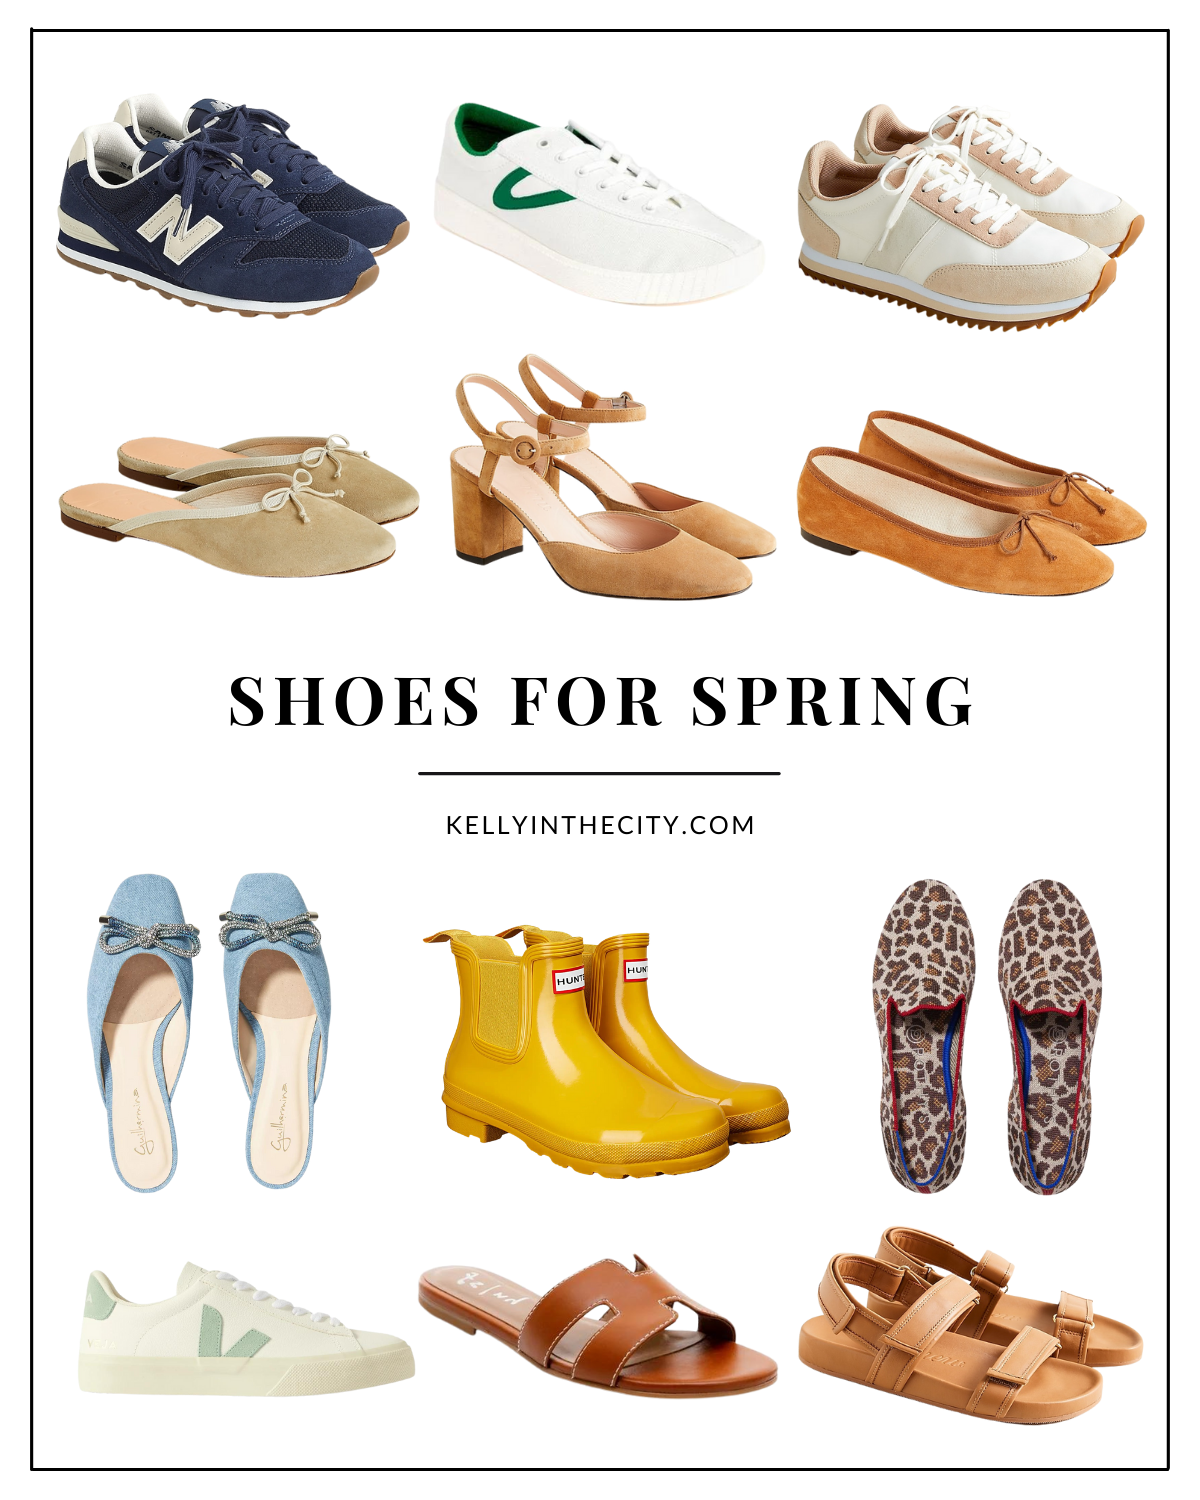 Shoes for Spring